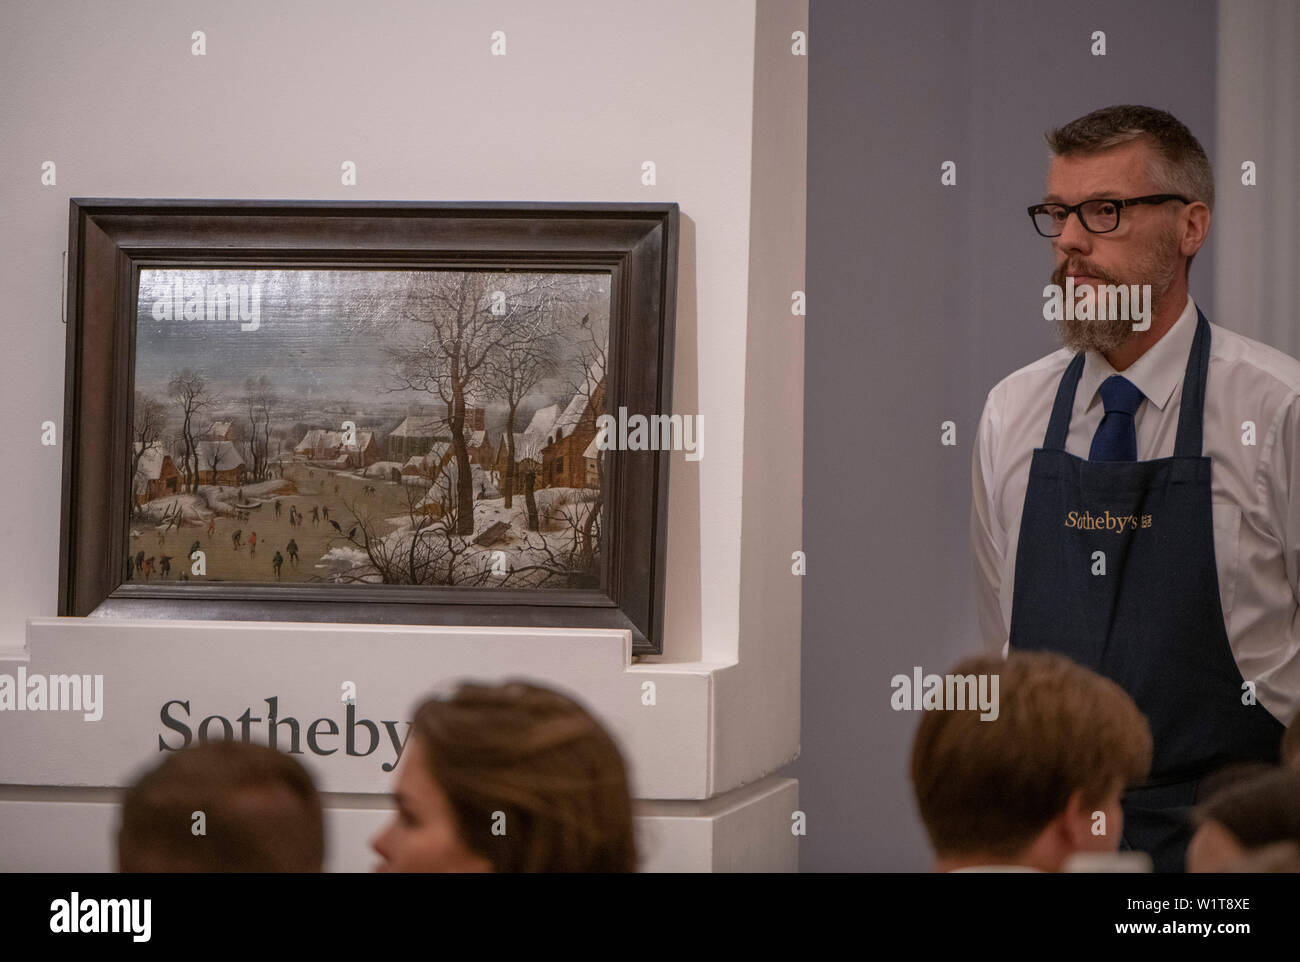 Sotheby’s, London, UK. 3rd July 2019. The summer Old Masters Evening sale offers paintings from the 14th - 19th century by many of the most important painters of Western art. Highlights include a masterpiece by each of Britain’s greatest landscape painters - Turner, Constable and Gainsborough - and extraordinary works from the Baroque by Ribera and the exceptionally rare Johann Liss. Image: Pieter Brueghel the Younger, Winter Landscape with a Bird Trap. Credit: Malcolm Park/Alamy Live News. Stock Photo